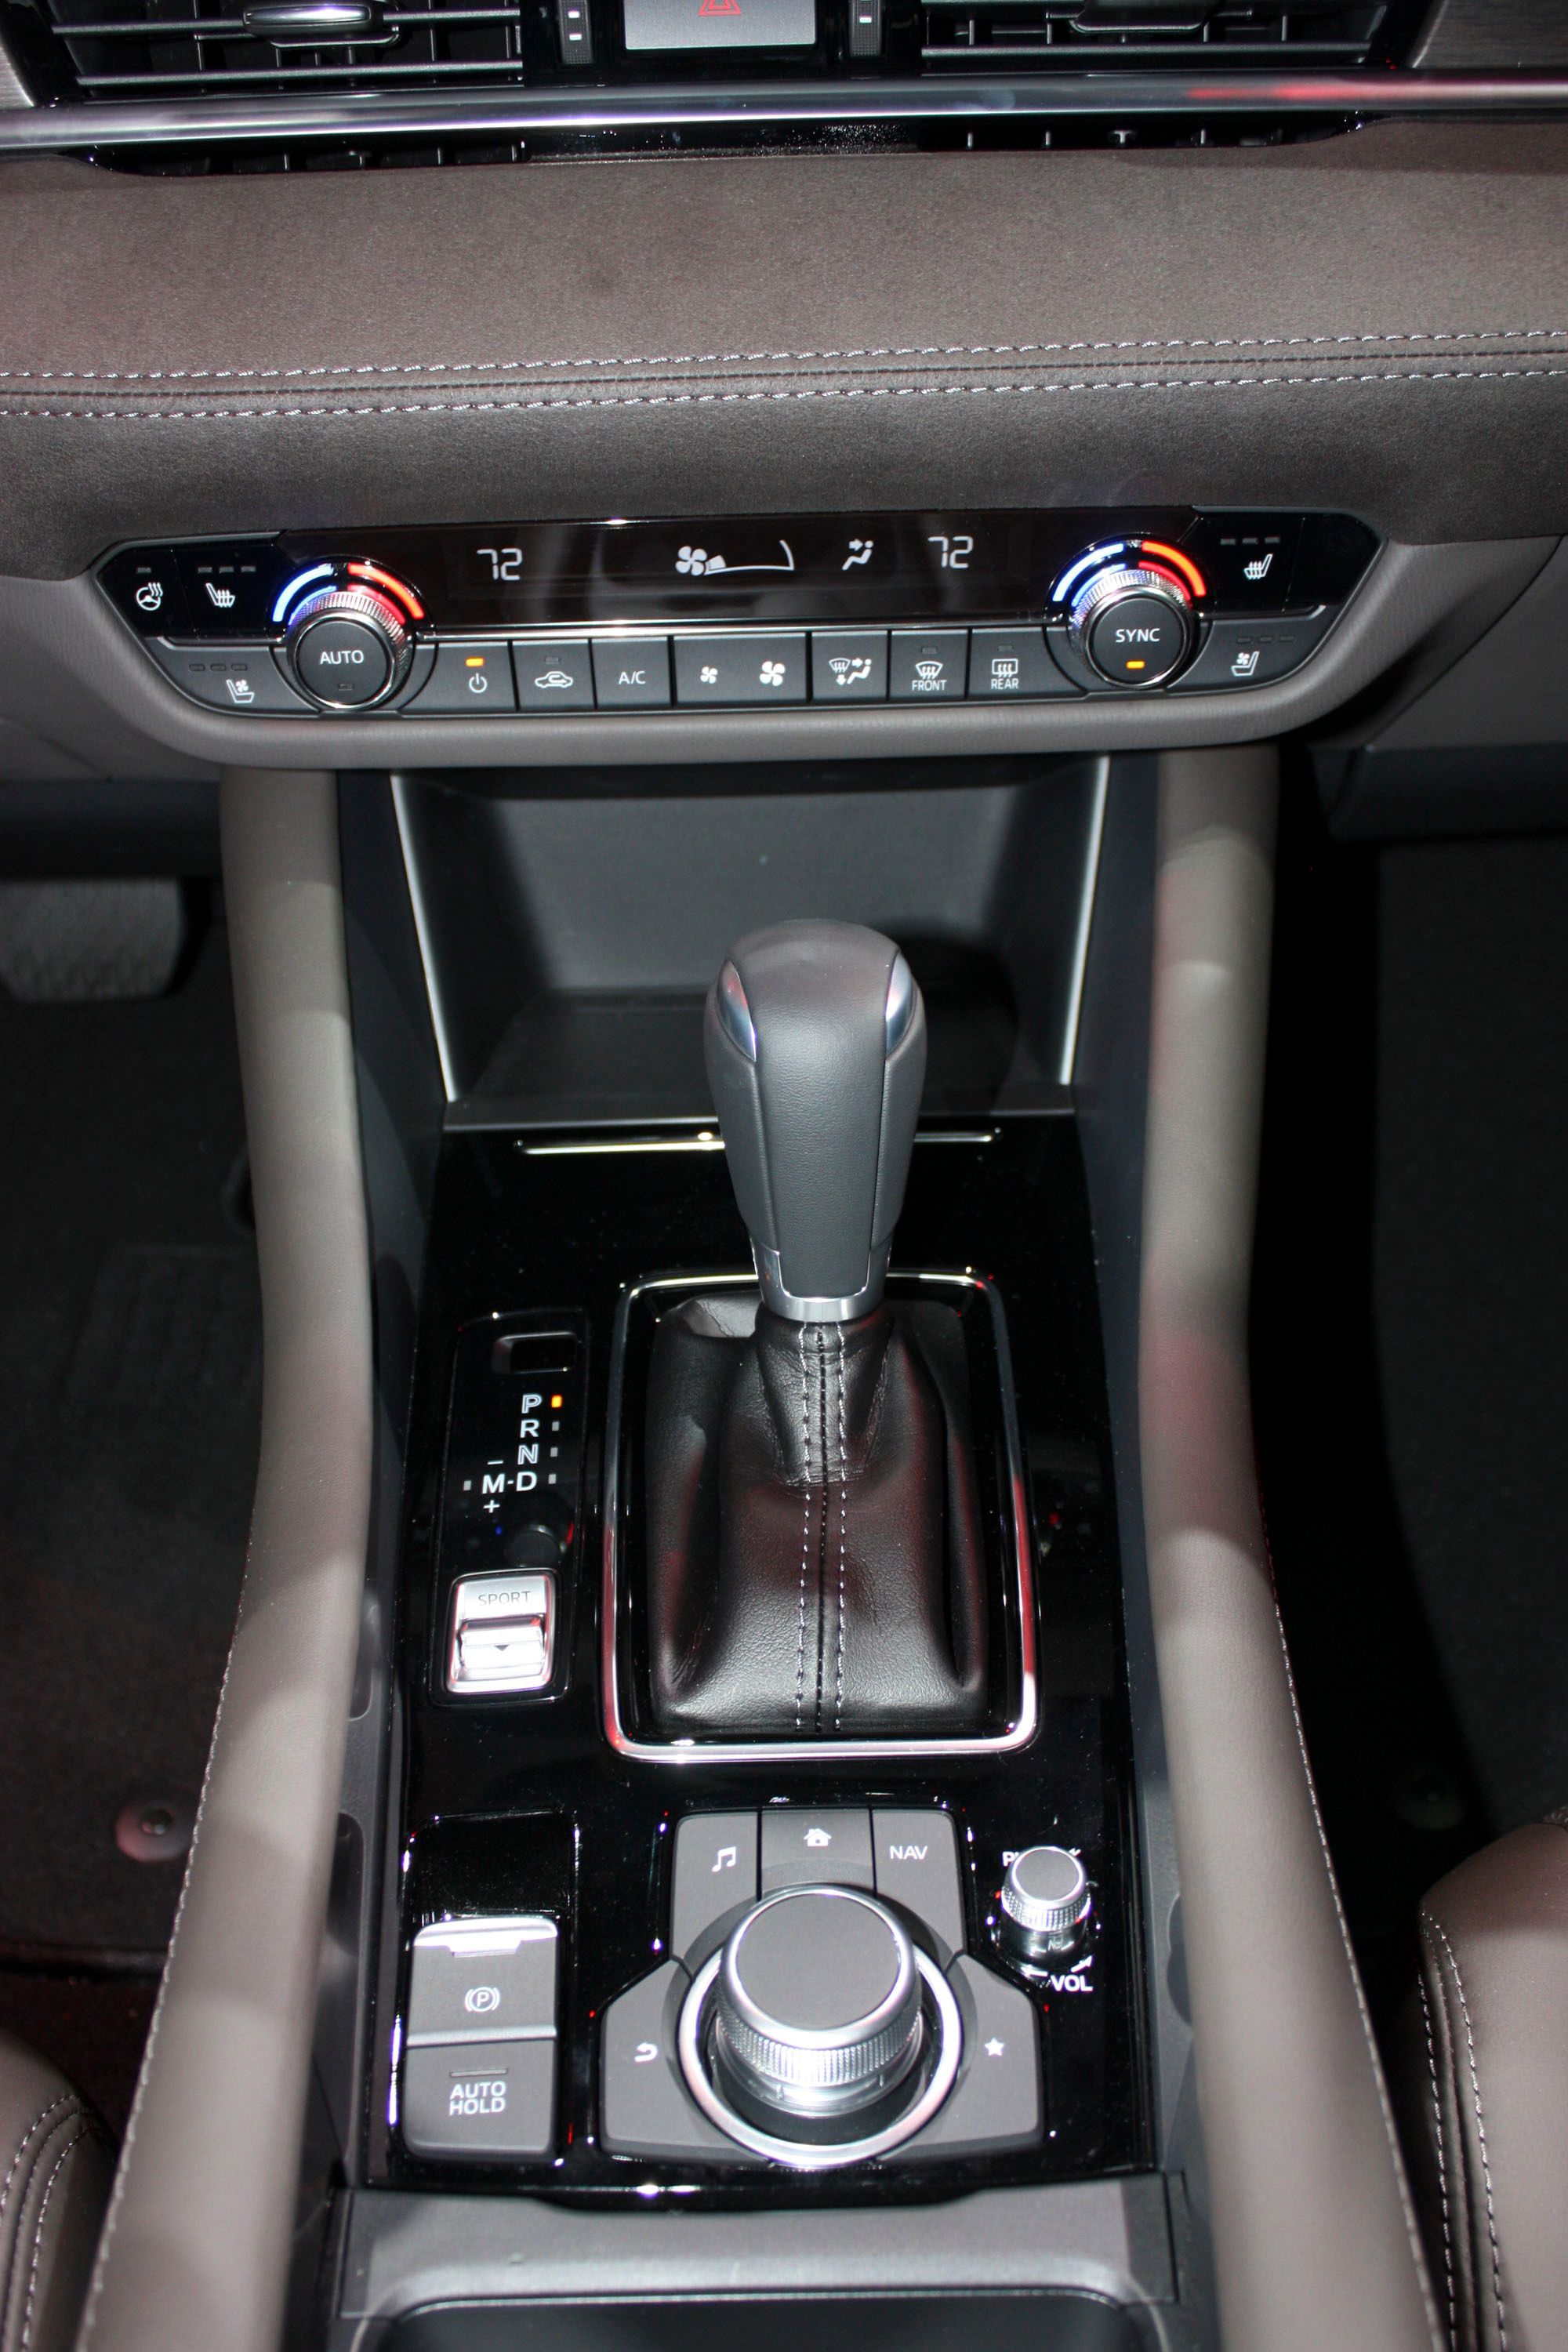 Six-speed automatic for the turbo